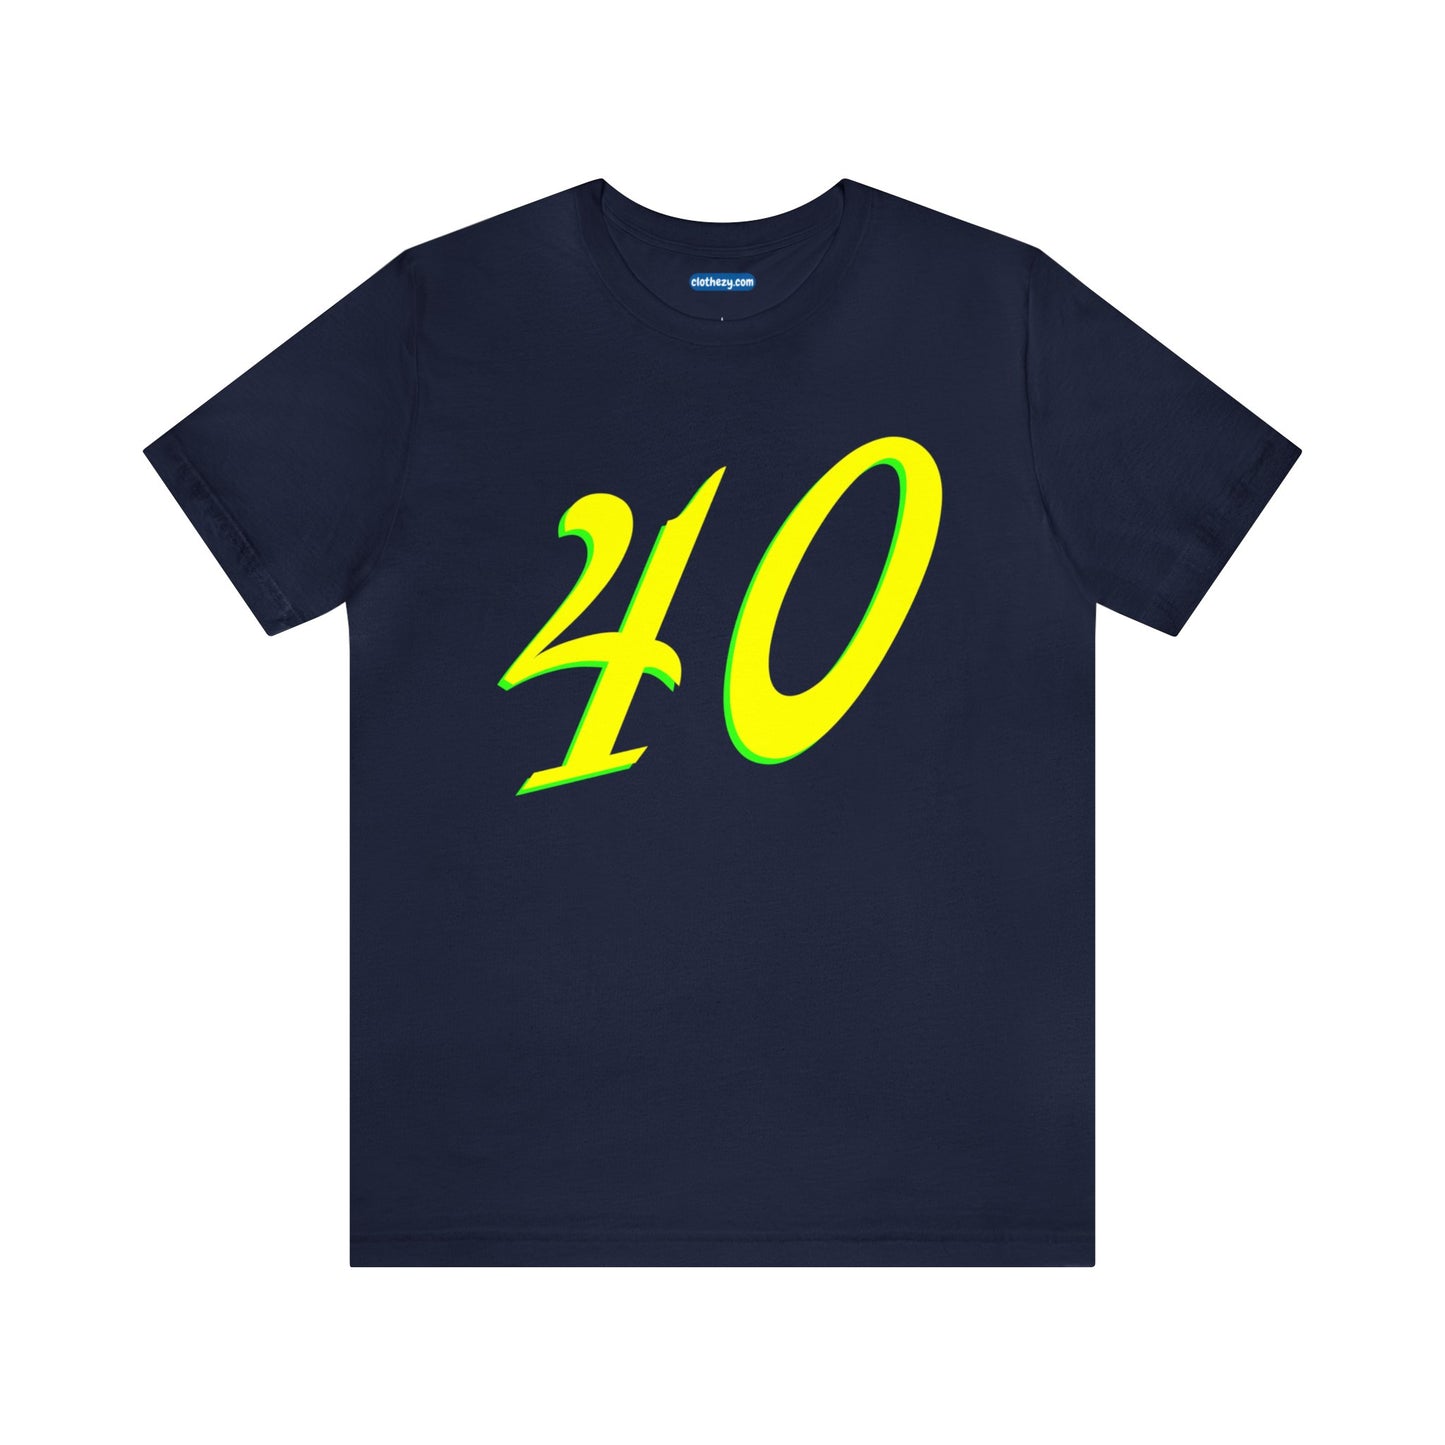 Number 40 Design - Soft Cotton Tee for birthdays and celebrations, Gift for friends and family, Multiple Options by clothezy.com in Navy Size Small - Buy Now